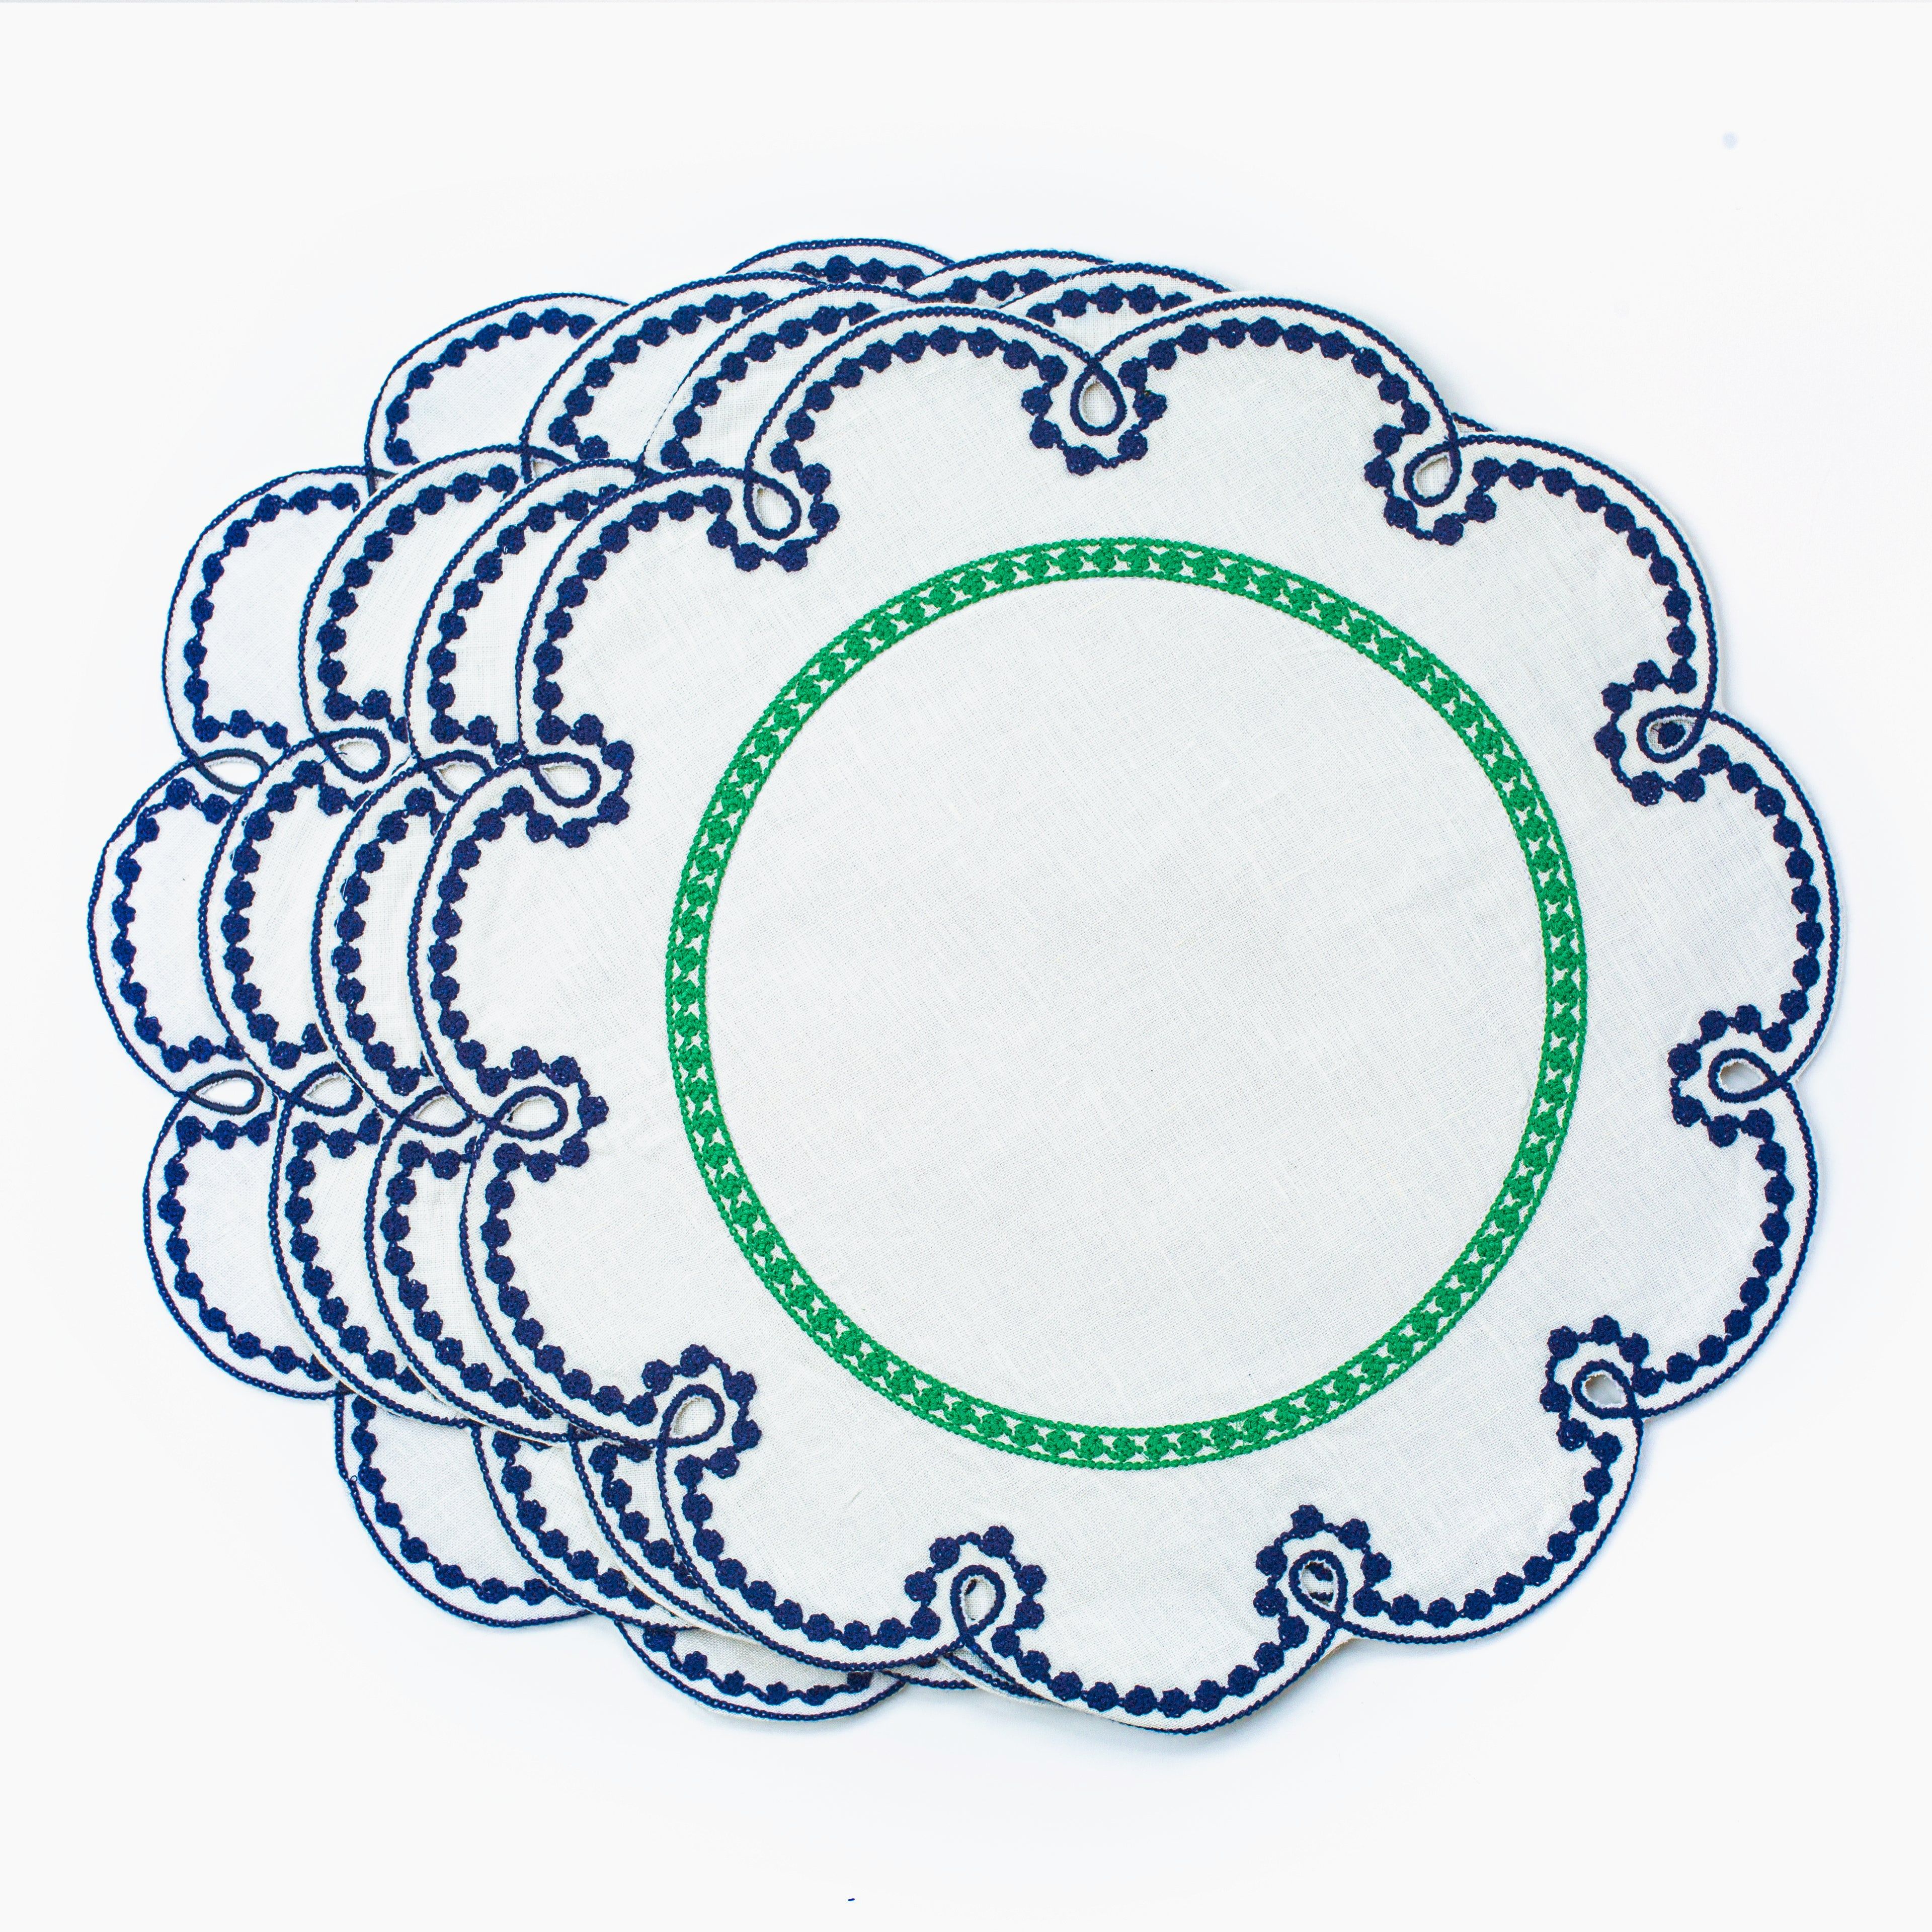 Fête Embroidered Linen Placemats in Blue/Green (Set of 4)